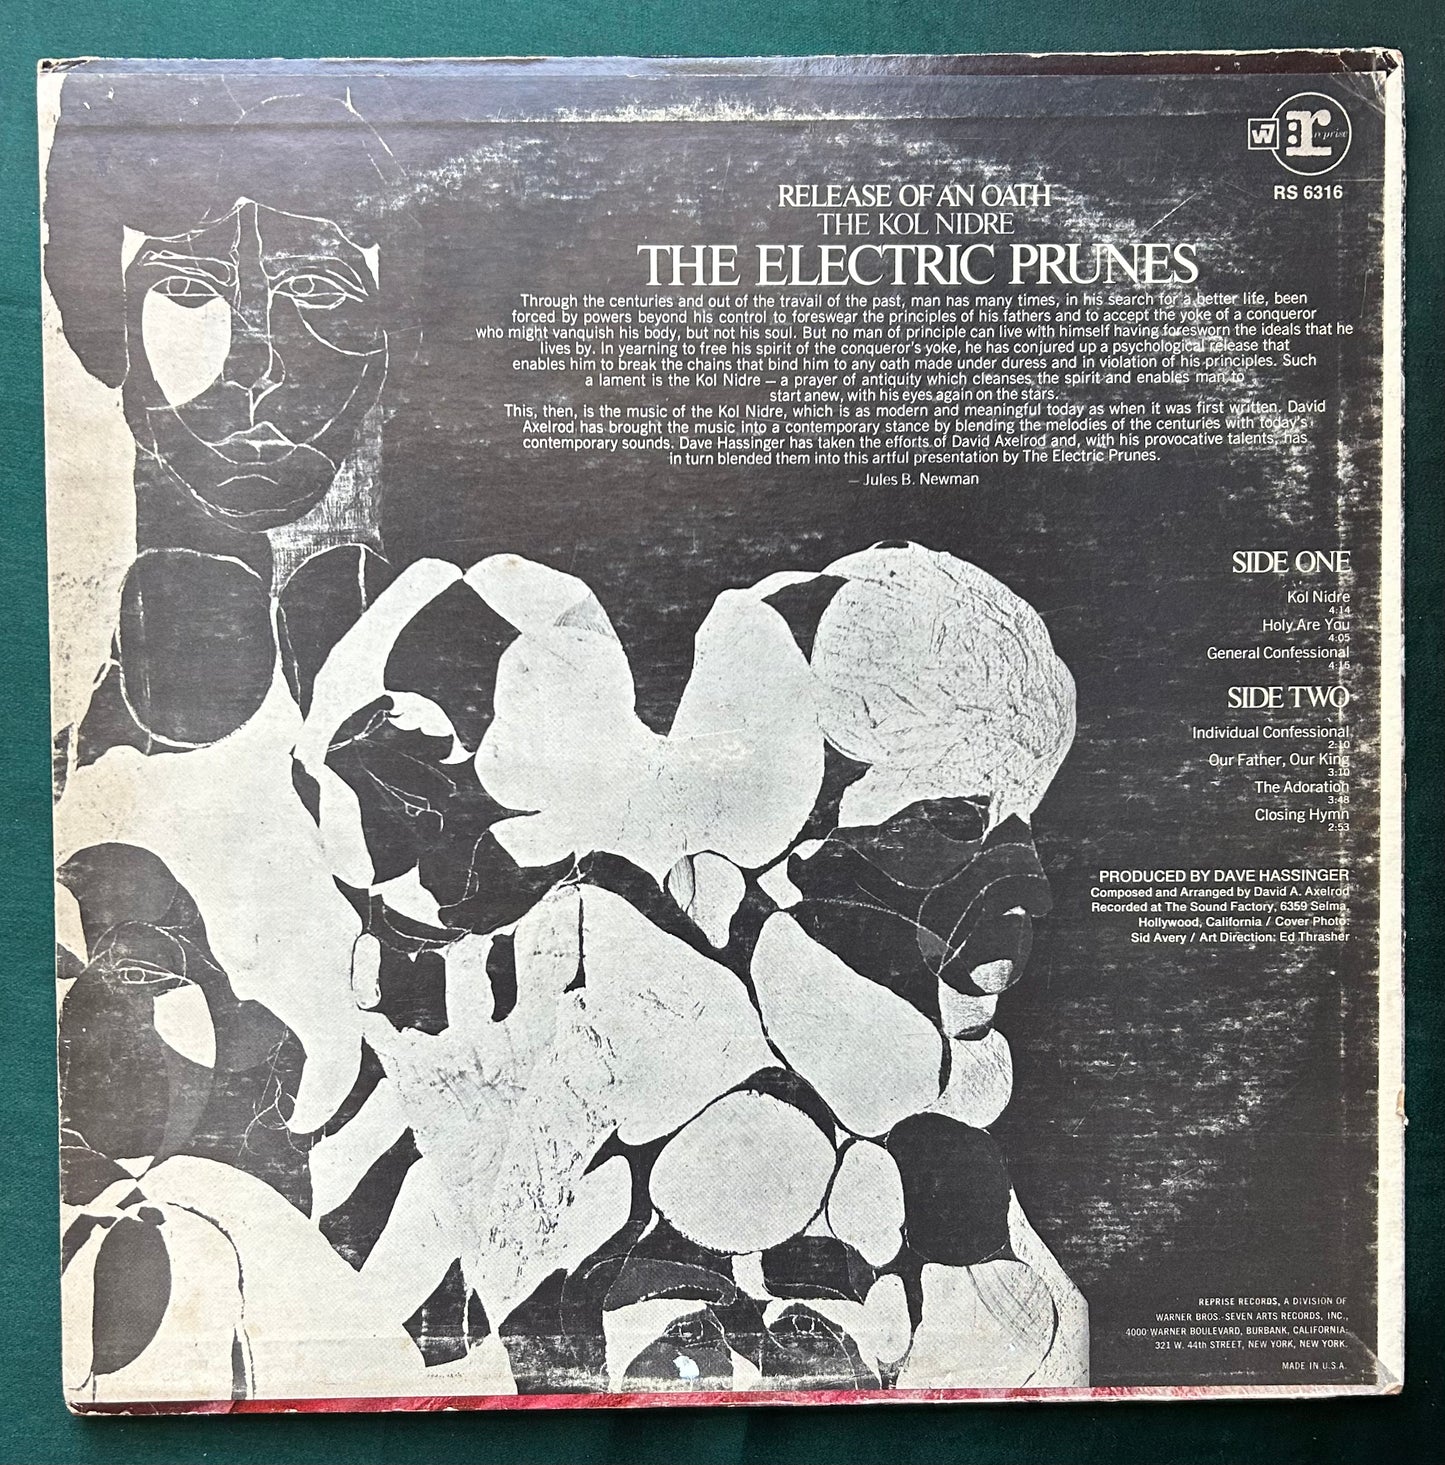 The Electric Prunes - Release Of An Oath White Label Promo 1968 Reprise Garage Psych